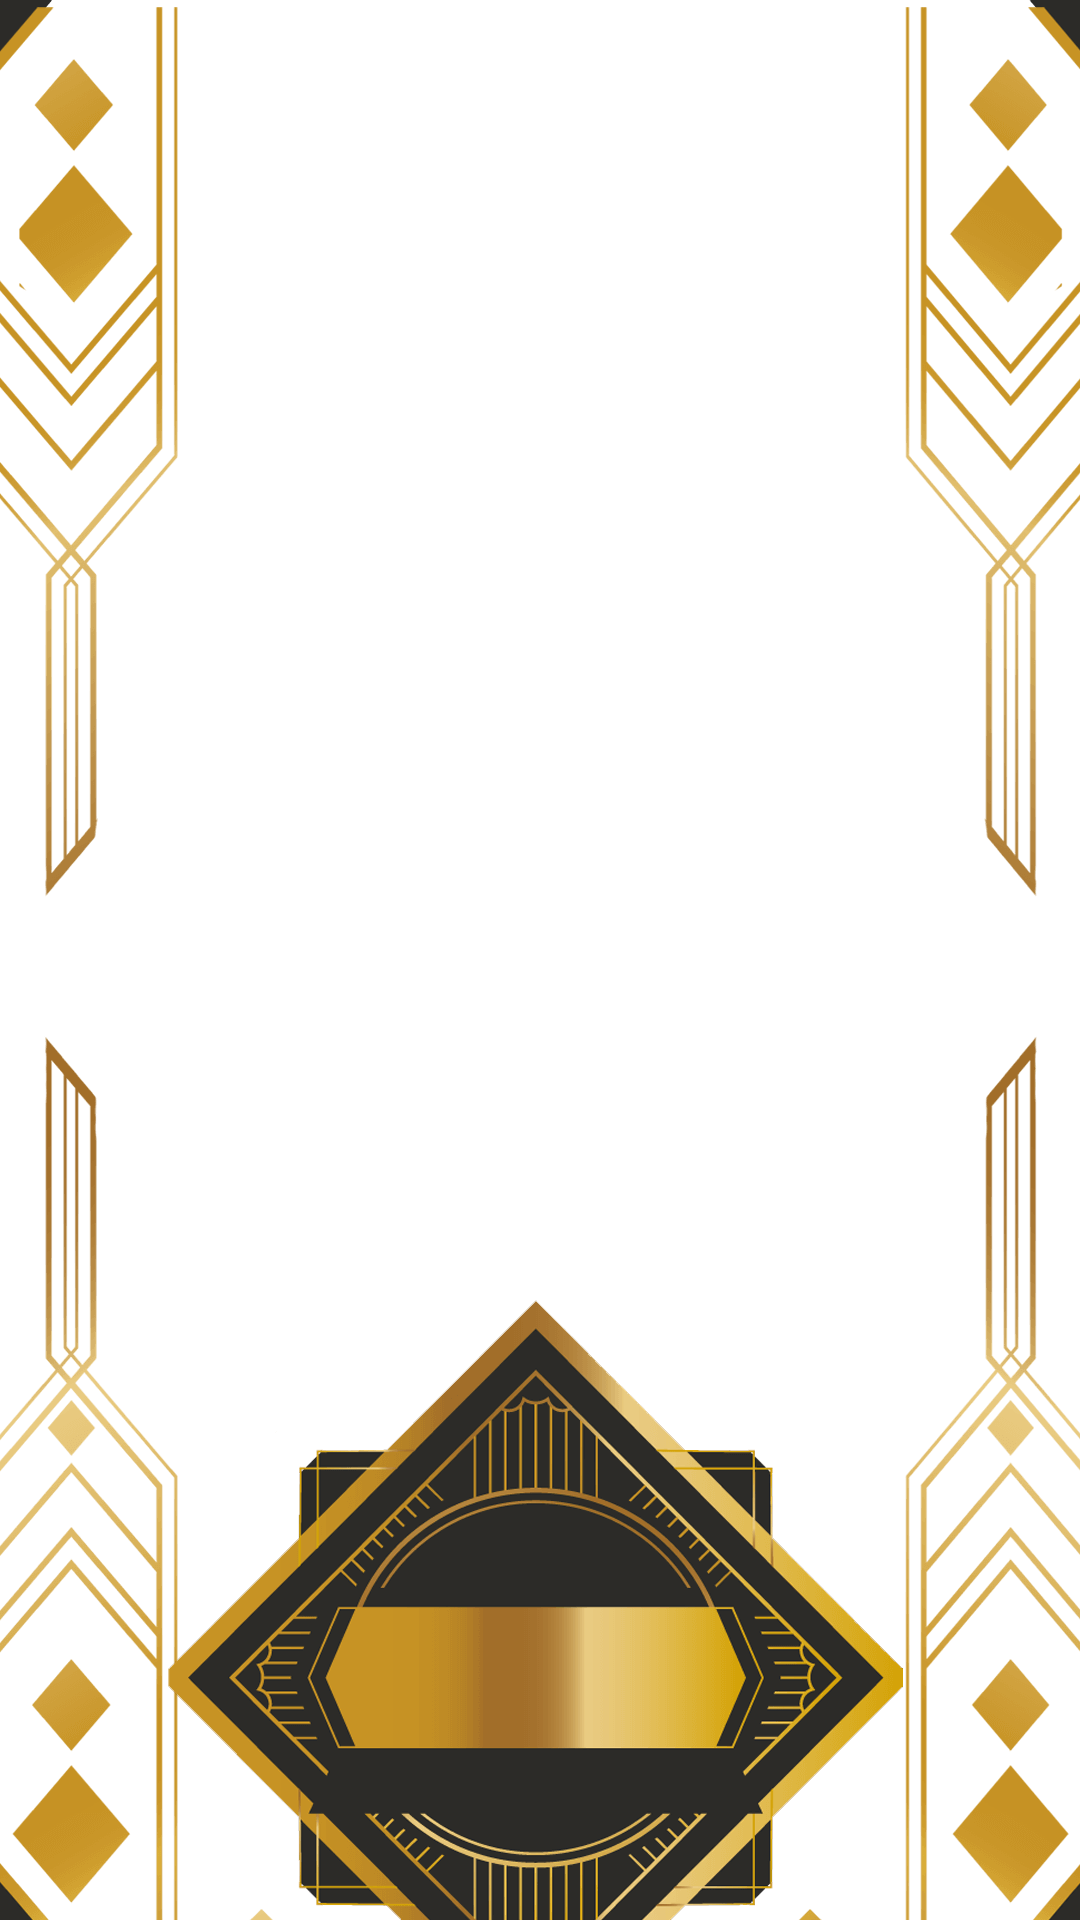 Related For Great Gatsby Clip Art - Great Gatsby Clip Art (1080x1920)